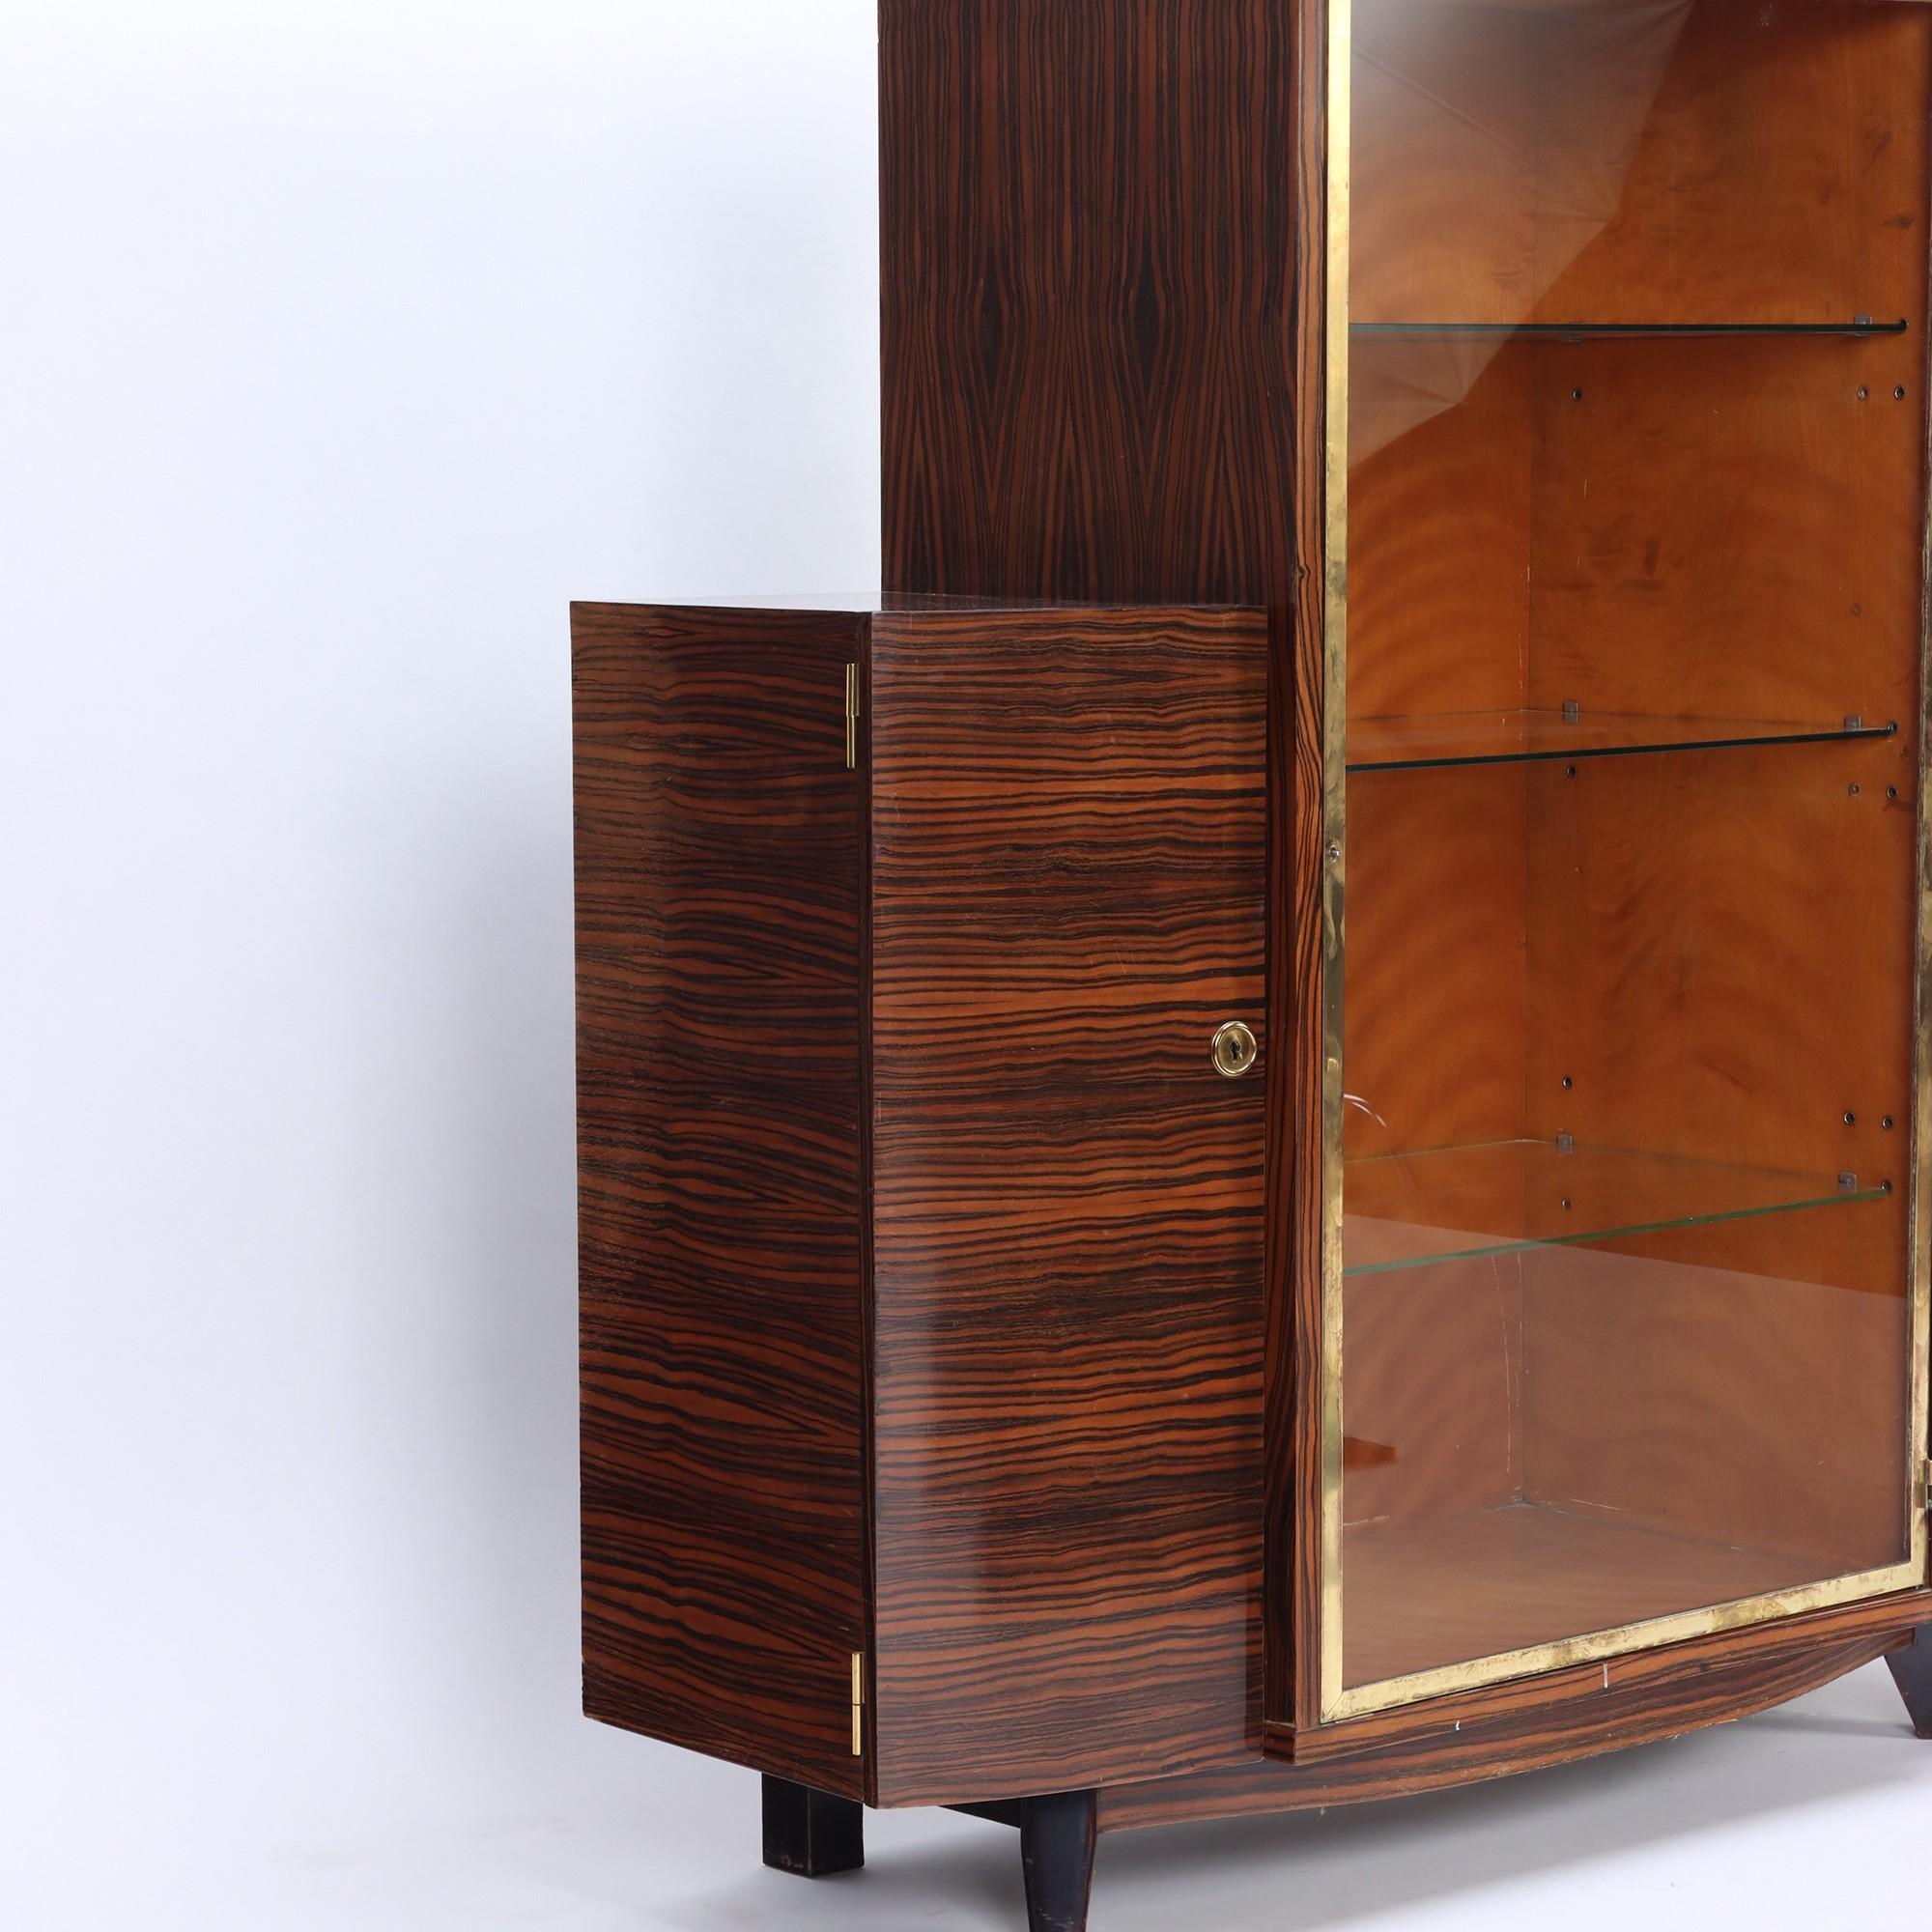 An elegant French Art Deco macassar cabinet, having a bronze and glass door opening to glass shelves for display. Cabinet is flanked by drawers on either side. C 1935.